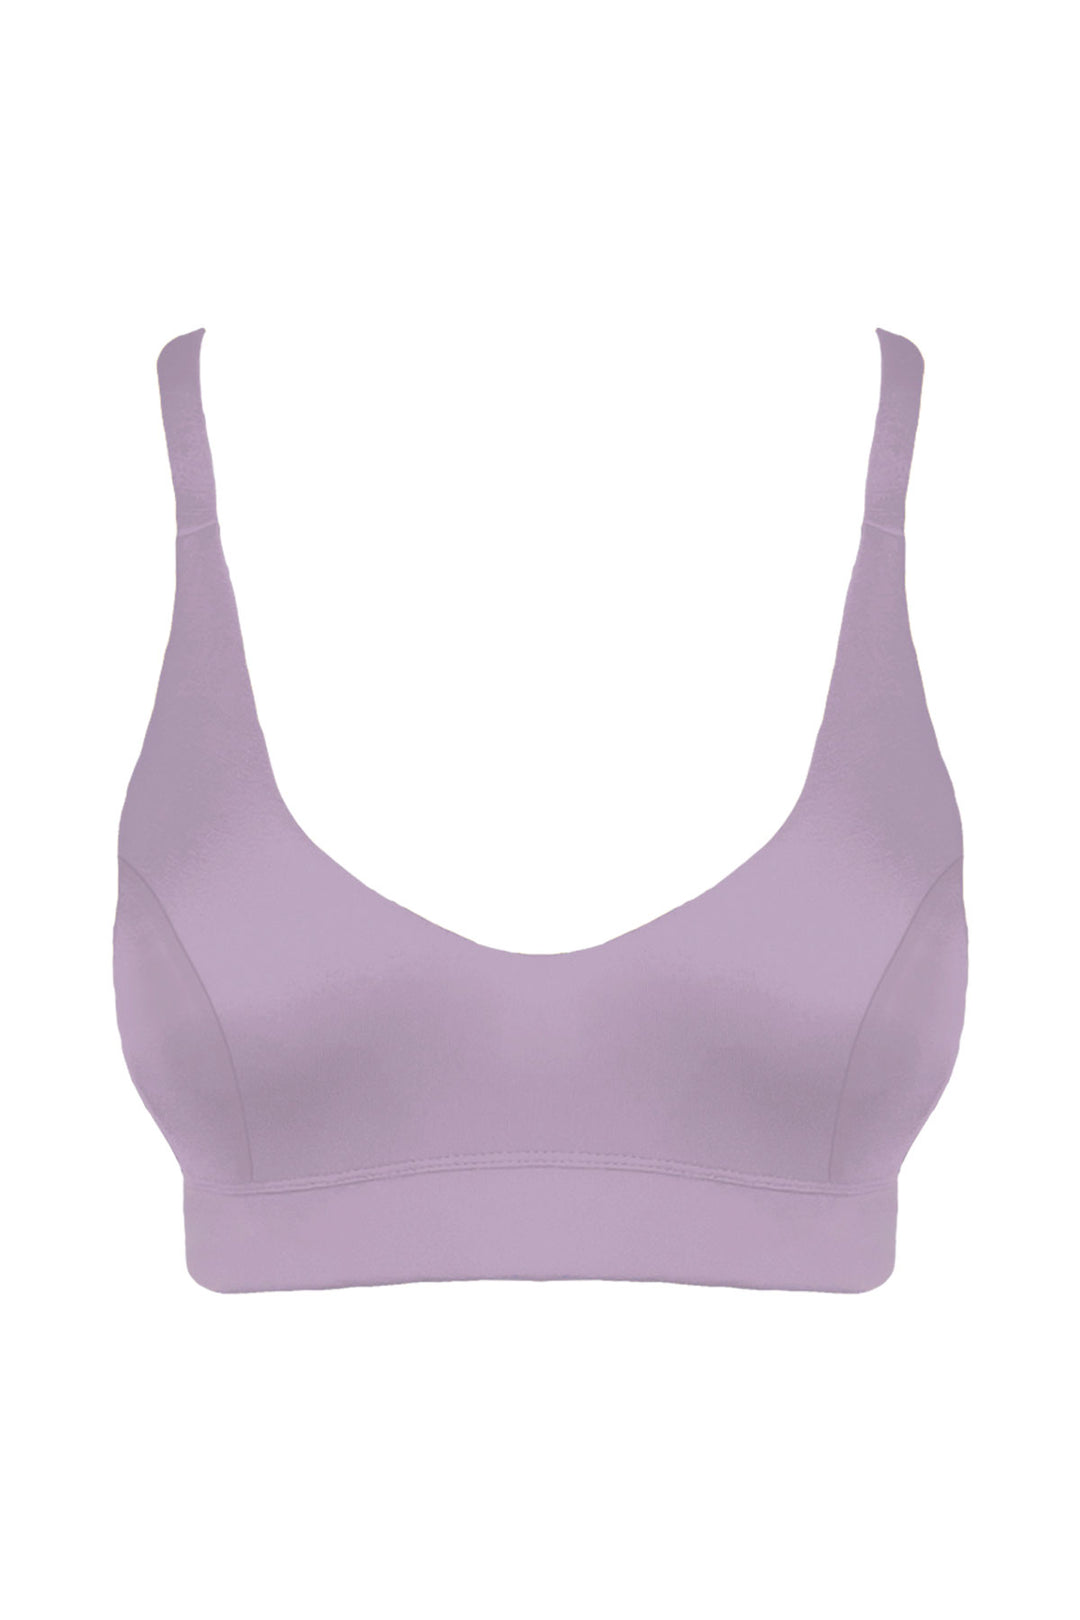 Sold out Siane Full Cup Bralette in Lavender